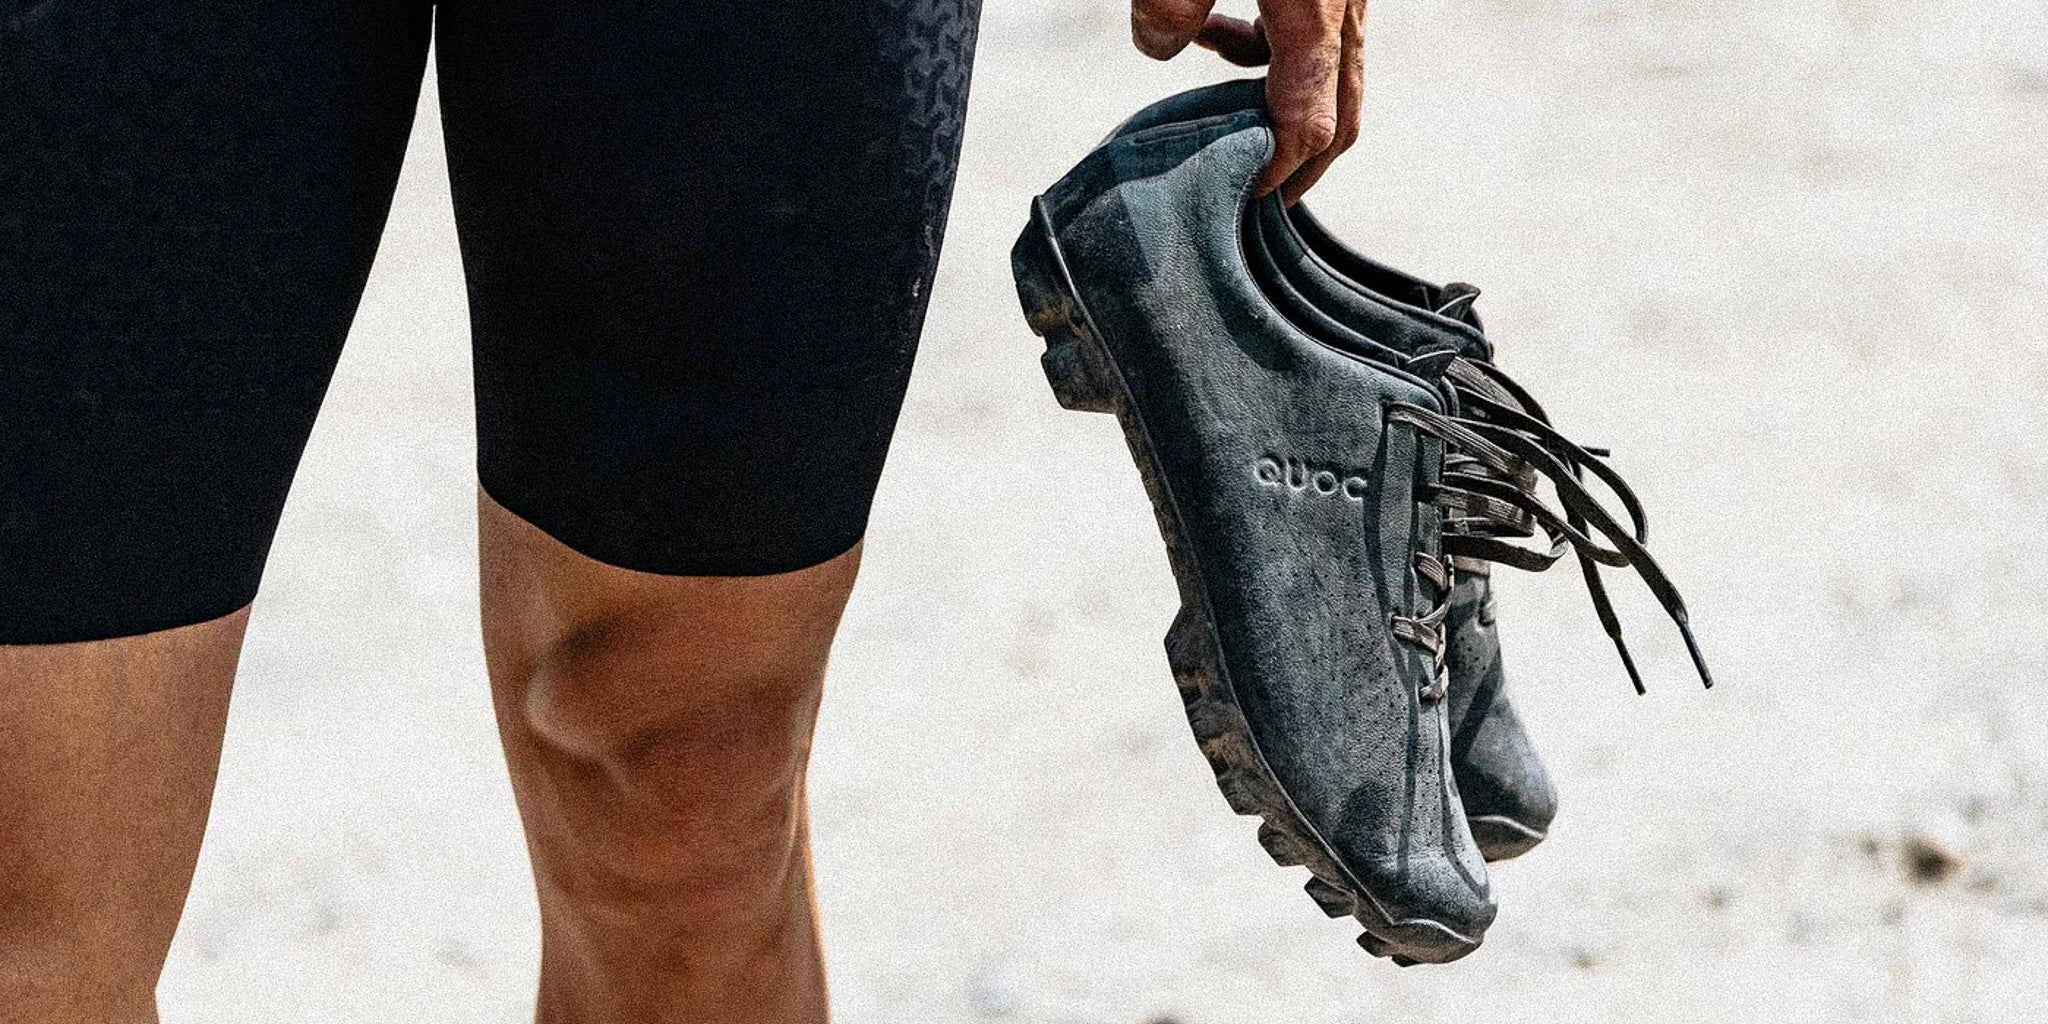 Cyclist holding a pair of worn-in QUOC mountain biking shoes, highlighting the rugged sole and secure lacing @ Bici.